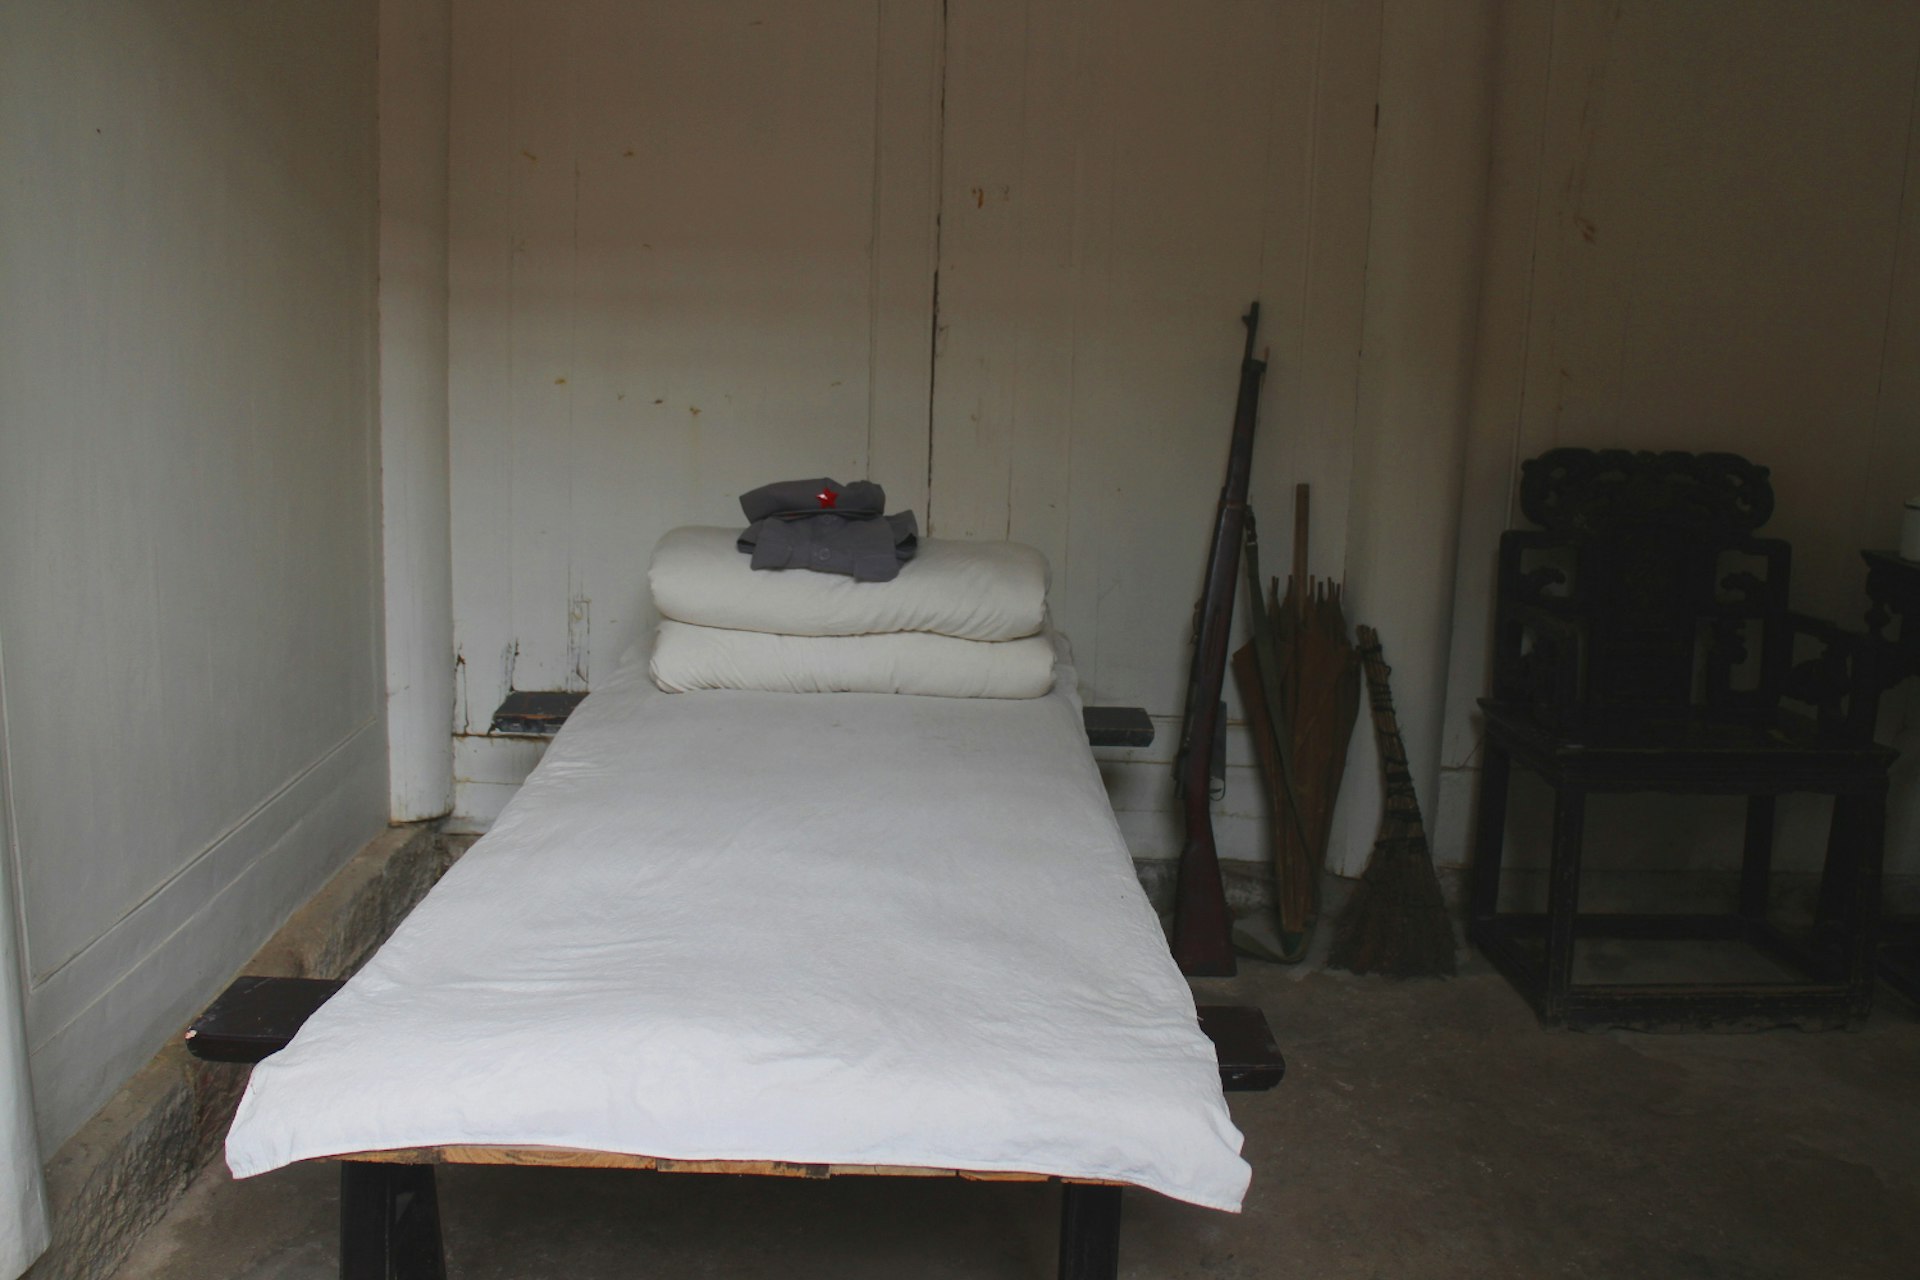 Revolutionary quarters: Red Army bedrooms carefully preserved at the Zunyi Conference Site. Image by Thomas Bird / Lonely Planet